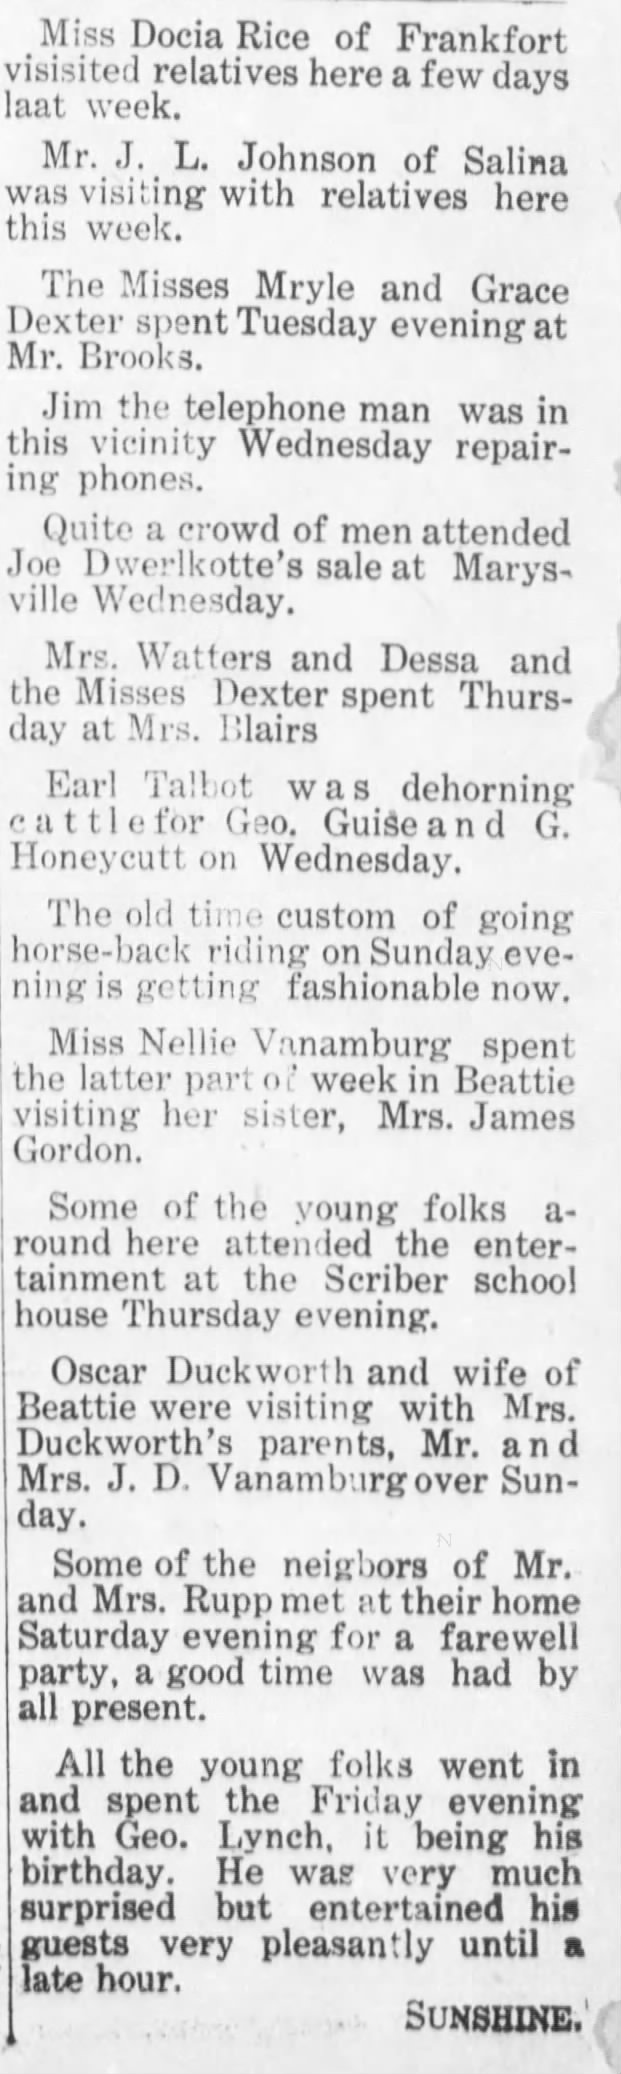 1911 3 2 Nellie visited sister in Beattie and Eva visited JD and Augusta VanAmburg 